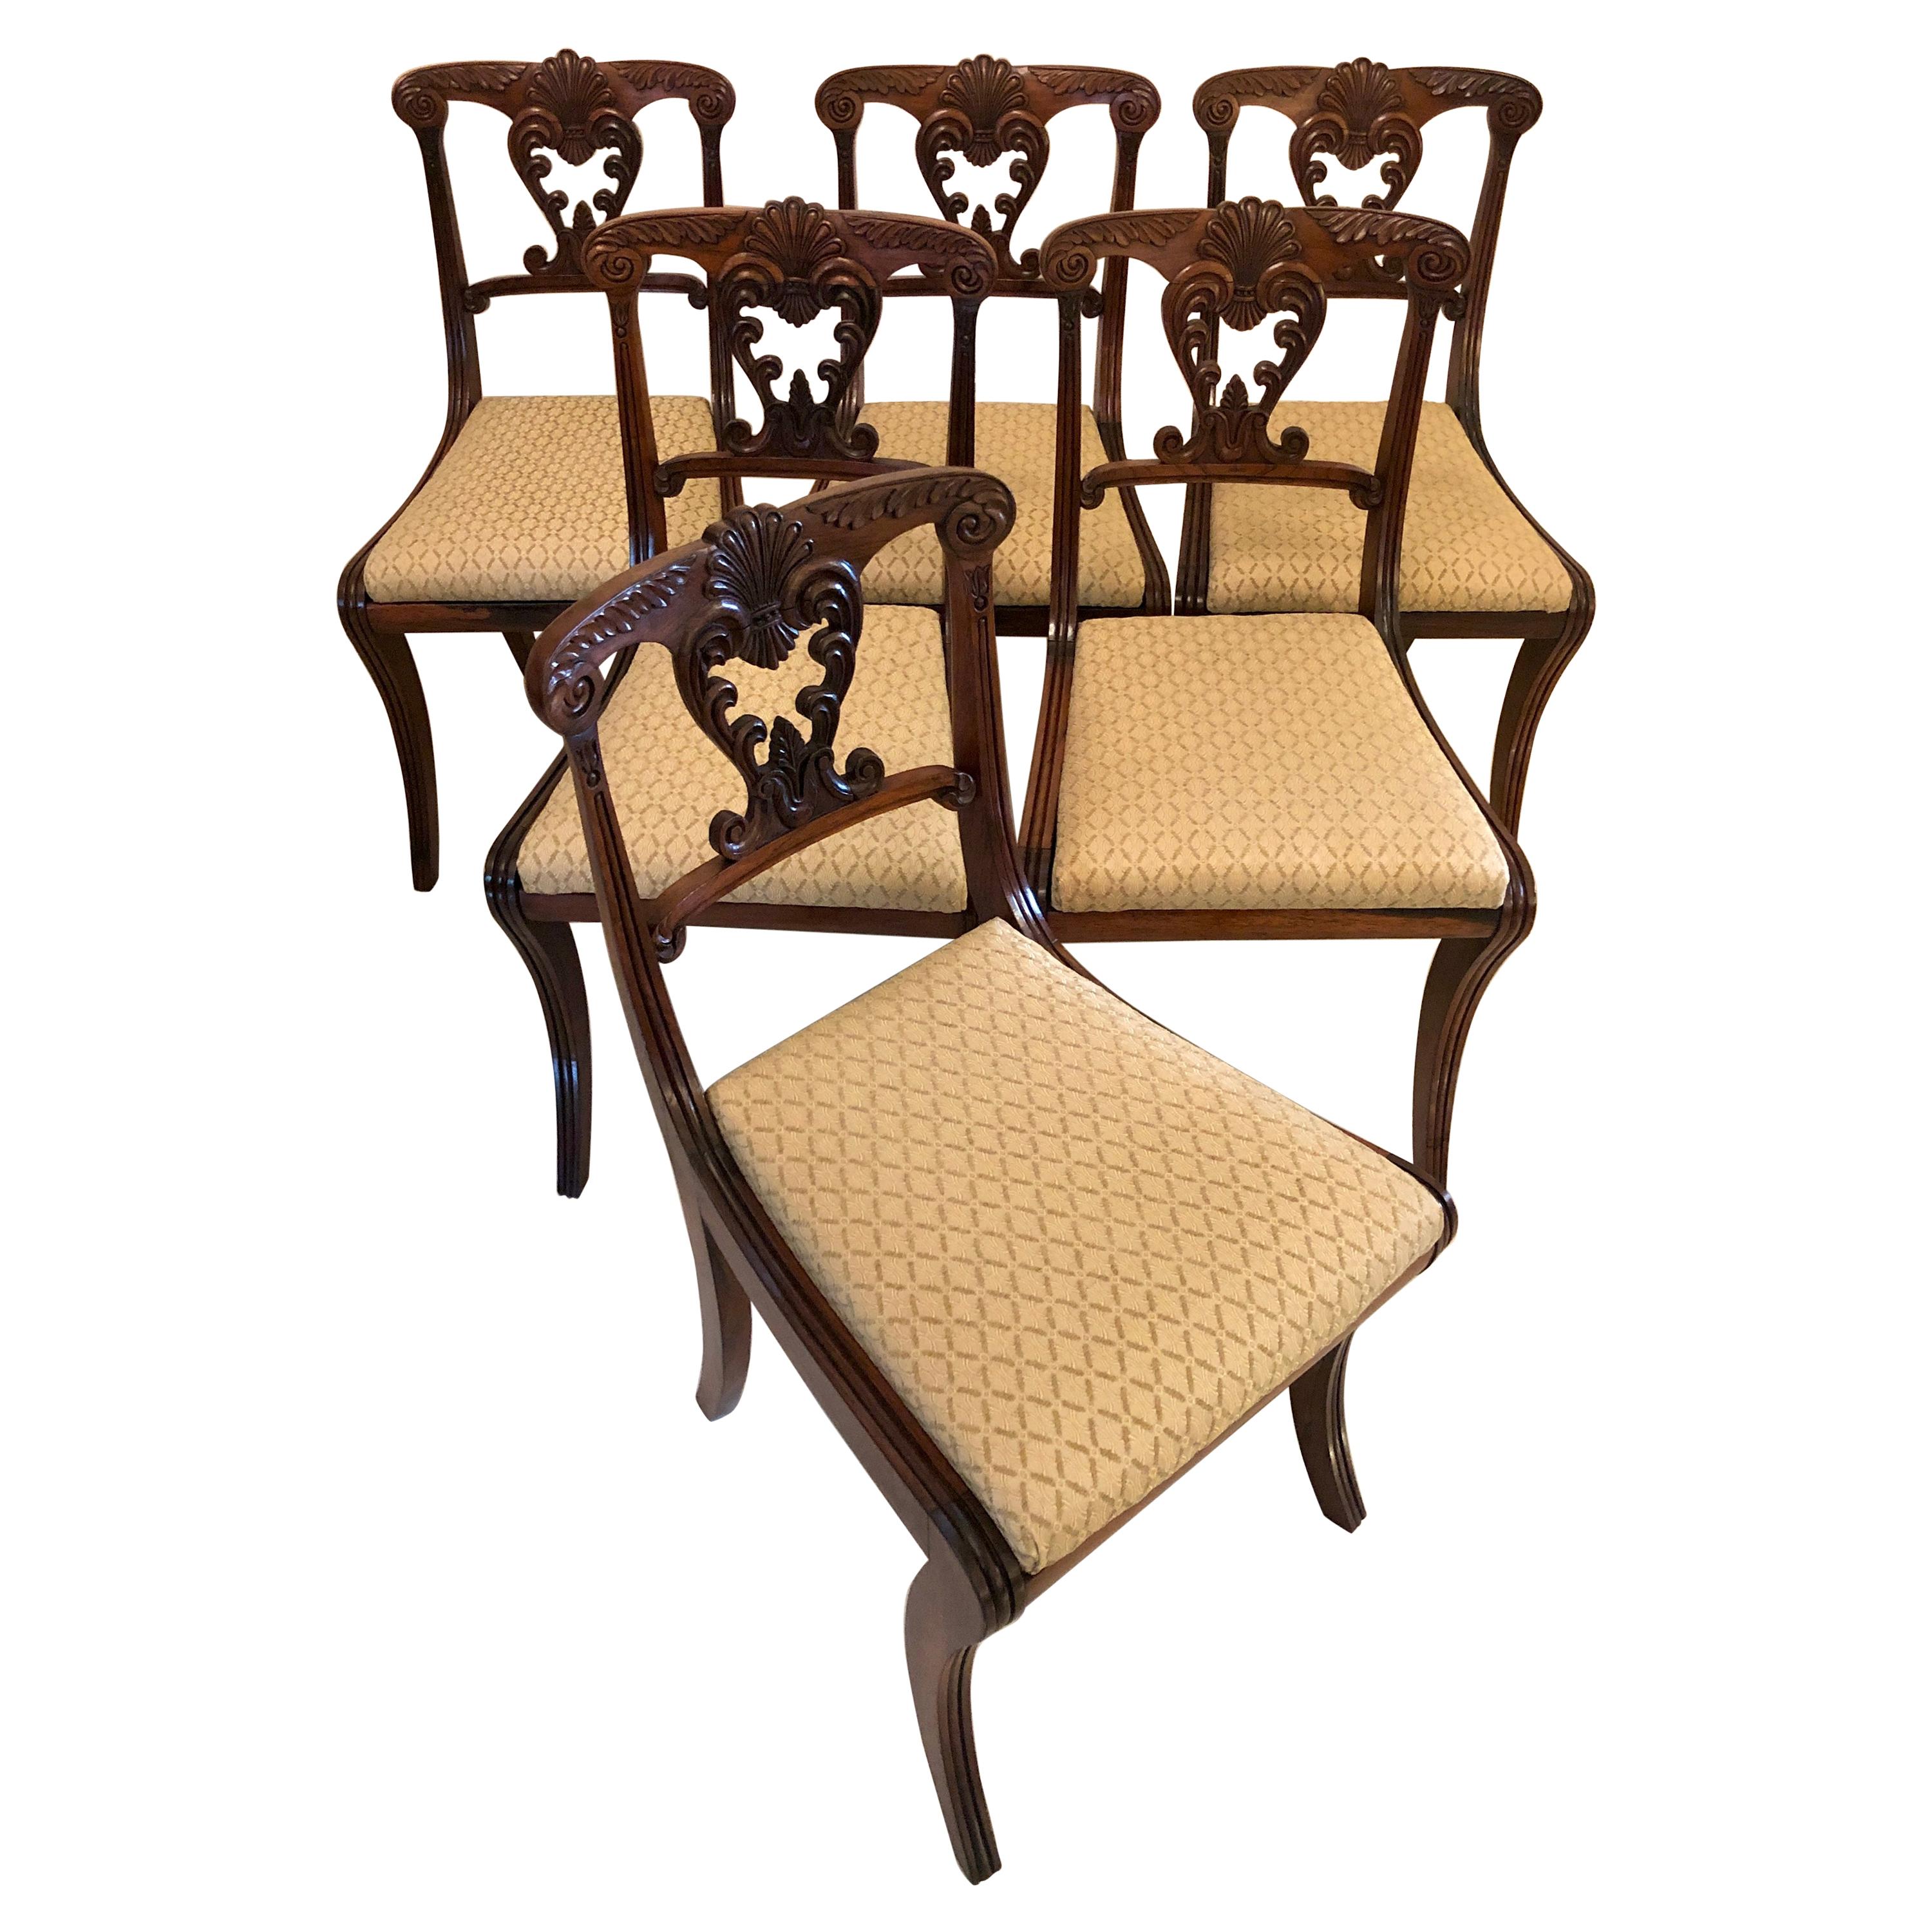 Outstanding Quality Set of Six Antique Regency Carved Rosewood Dining Chairs